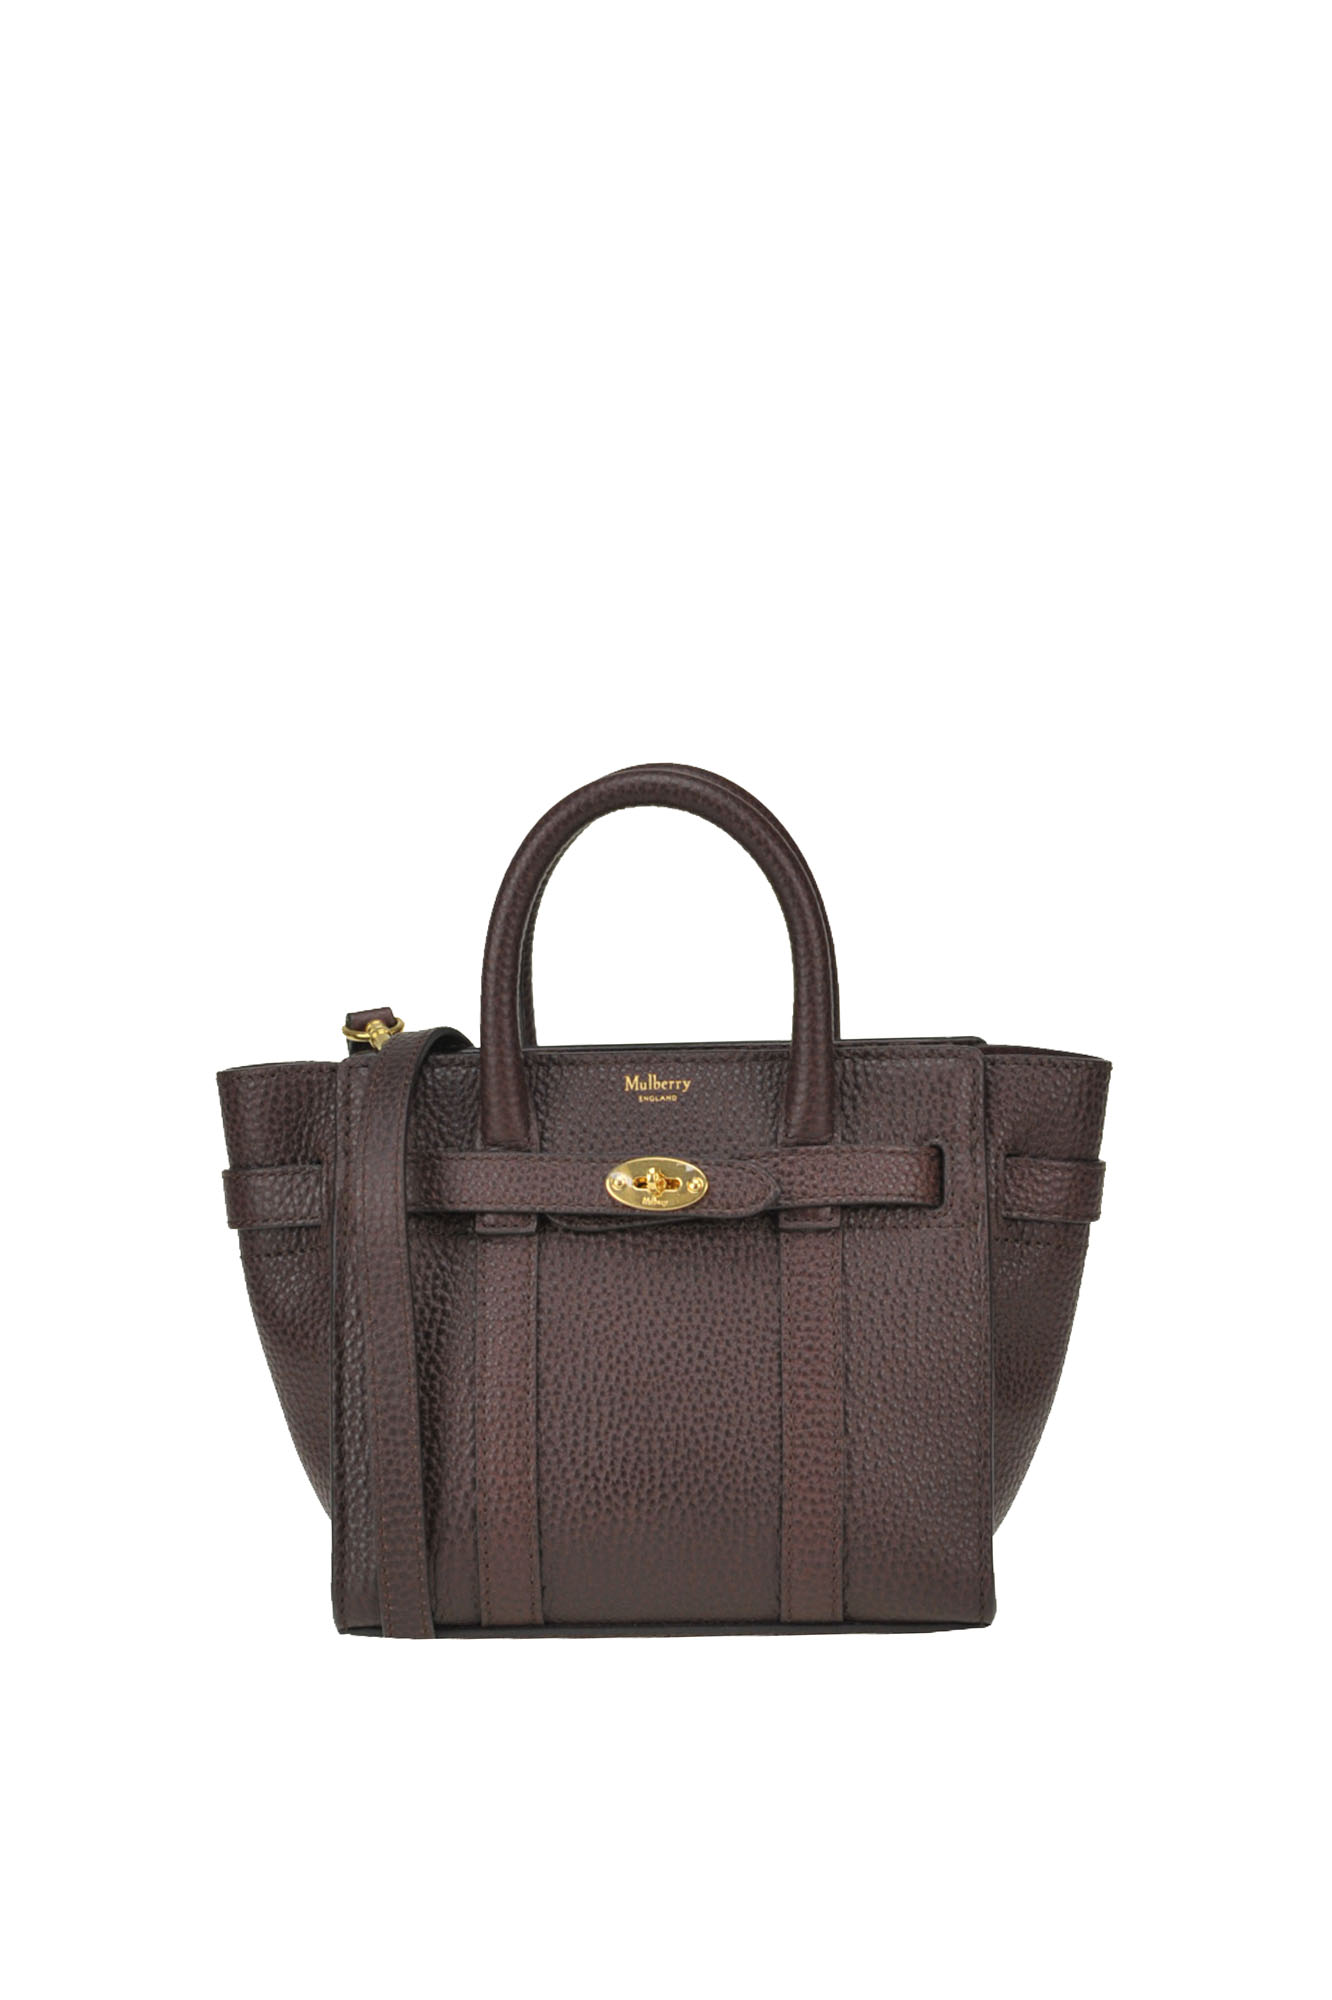 Mulberry Micro Zipped Bayswater Bag In Bordeaux